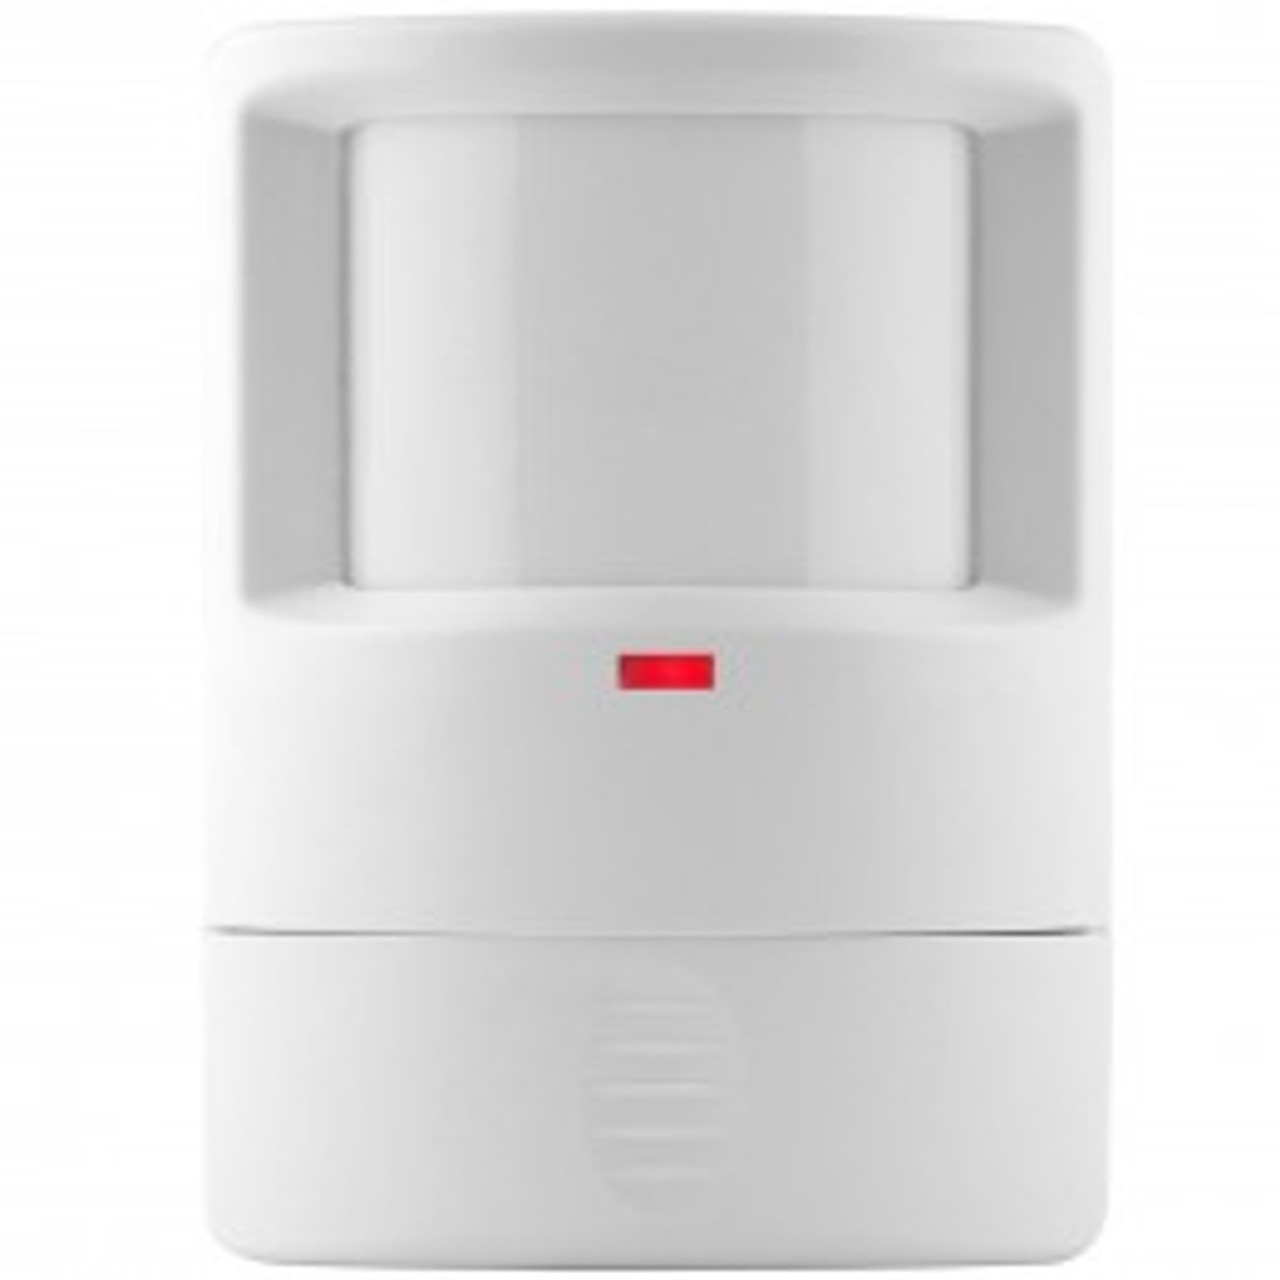 The MPW-L 150° passive infrared (PIR) occupancy sensors turn lighting systems on and off based on occupancy and ambient light levels. The light level feature keeps lights from turning on if the ambient light level is sufficient. The sensors can be configured to turn lighting on, and hold it on as long as the sensor detects occupancy. After no movement is detected for a specified time the lights are switched off. . * The MPW-L operated on 24V supplied by MPP-24 power pack sold separately.